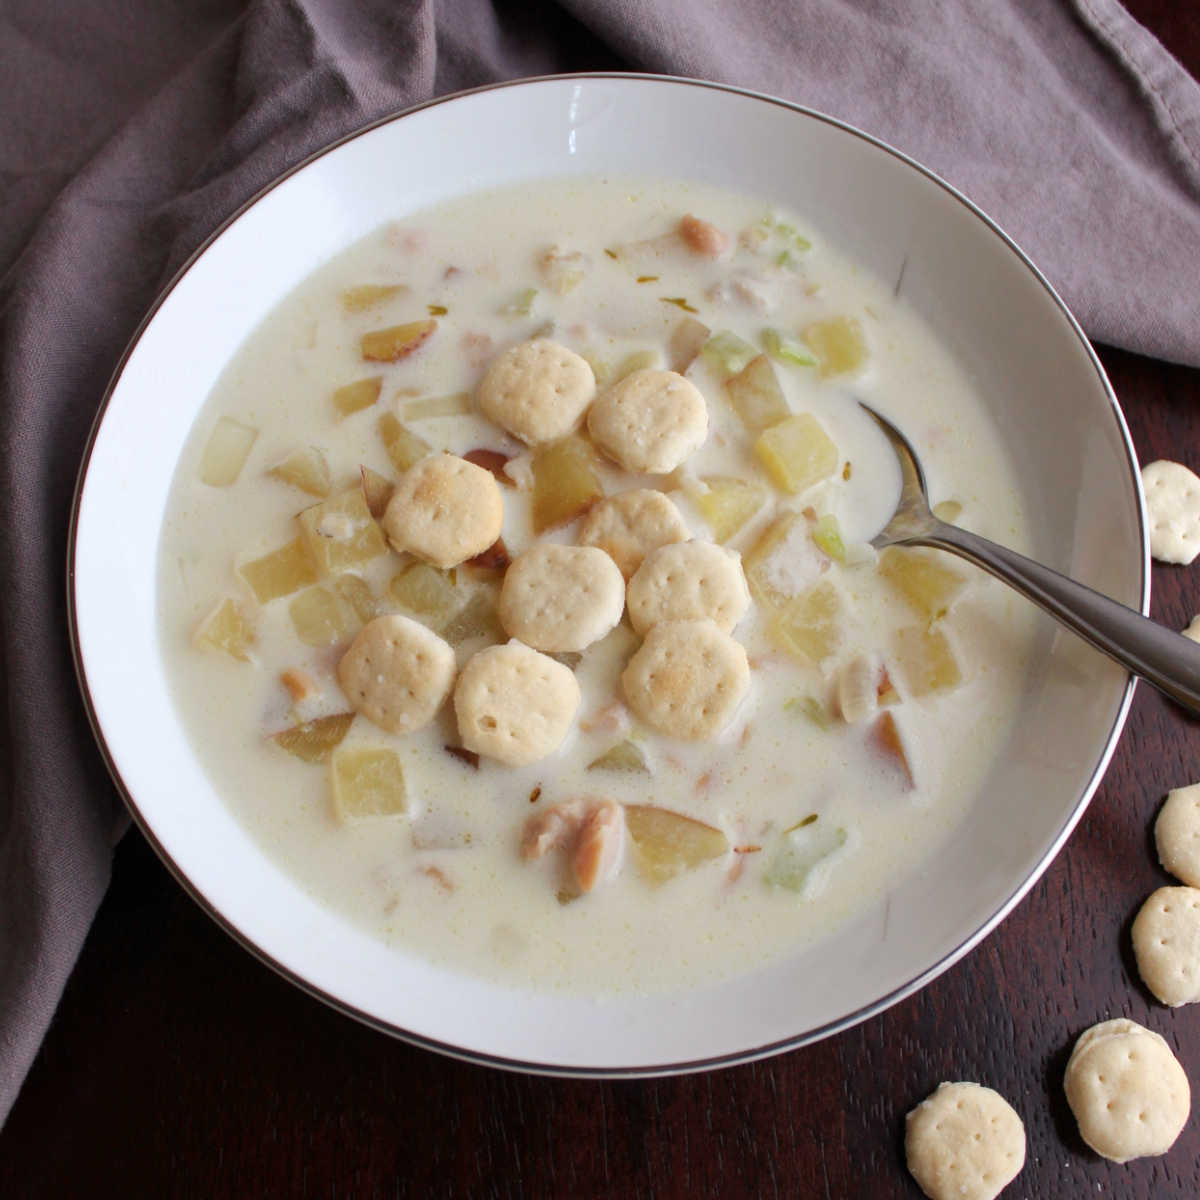 close up of spoon in bowl of creamy New England clam chowder with oyster crackers, ready to enjoy.